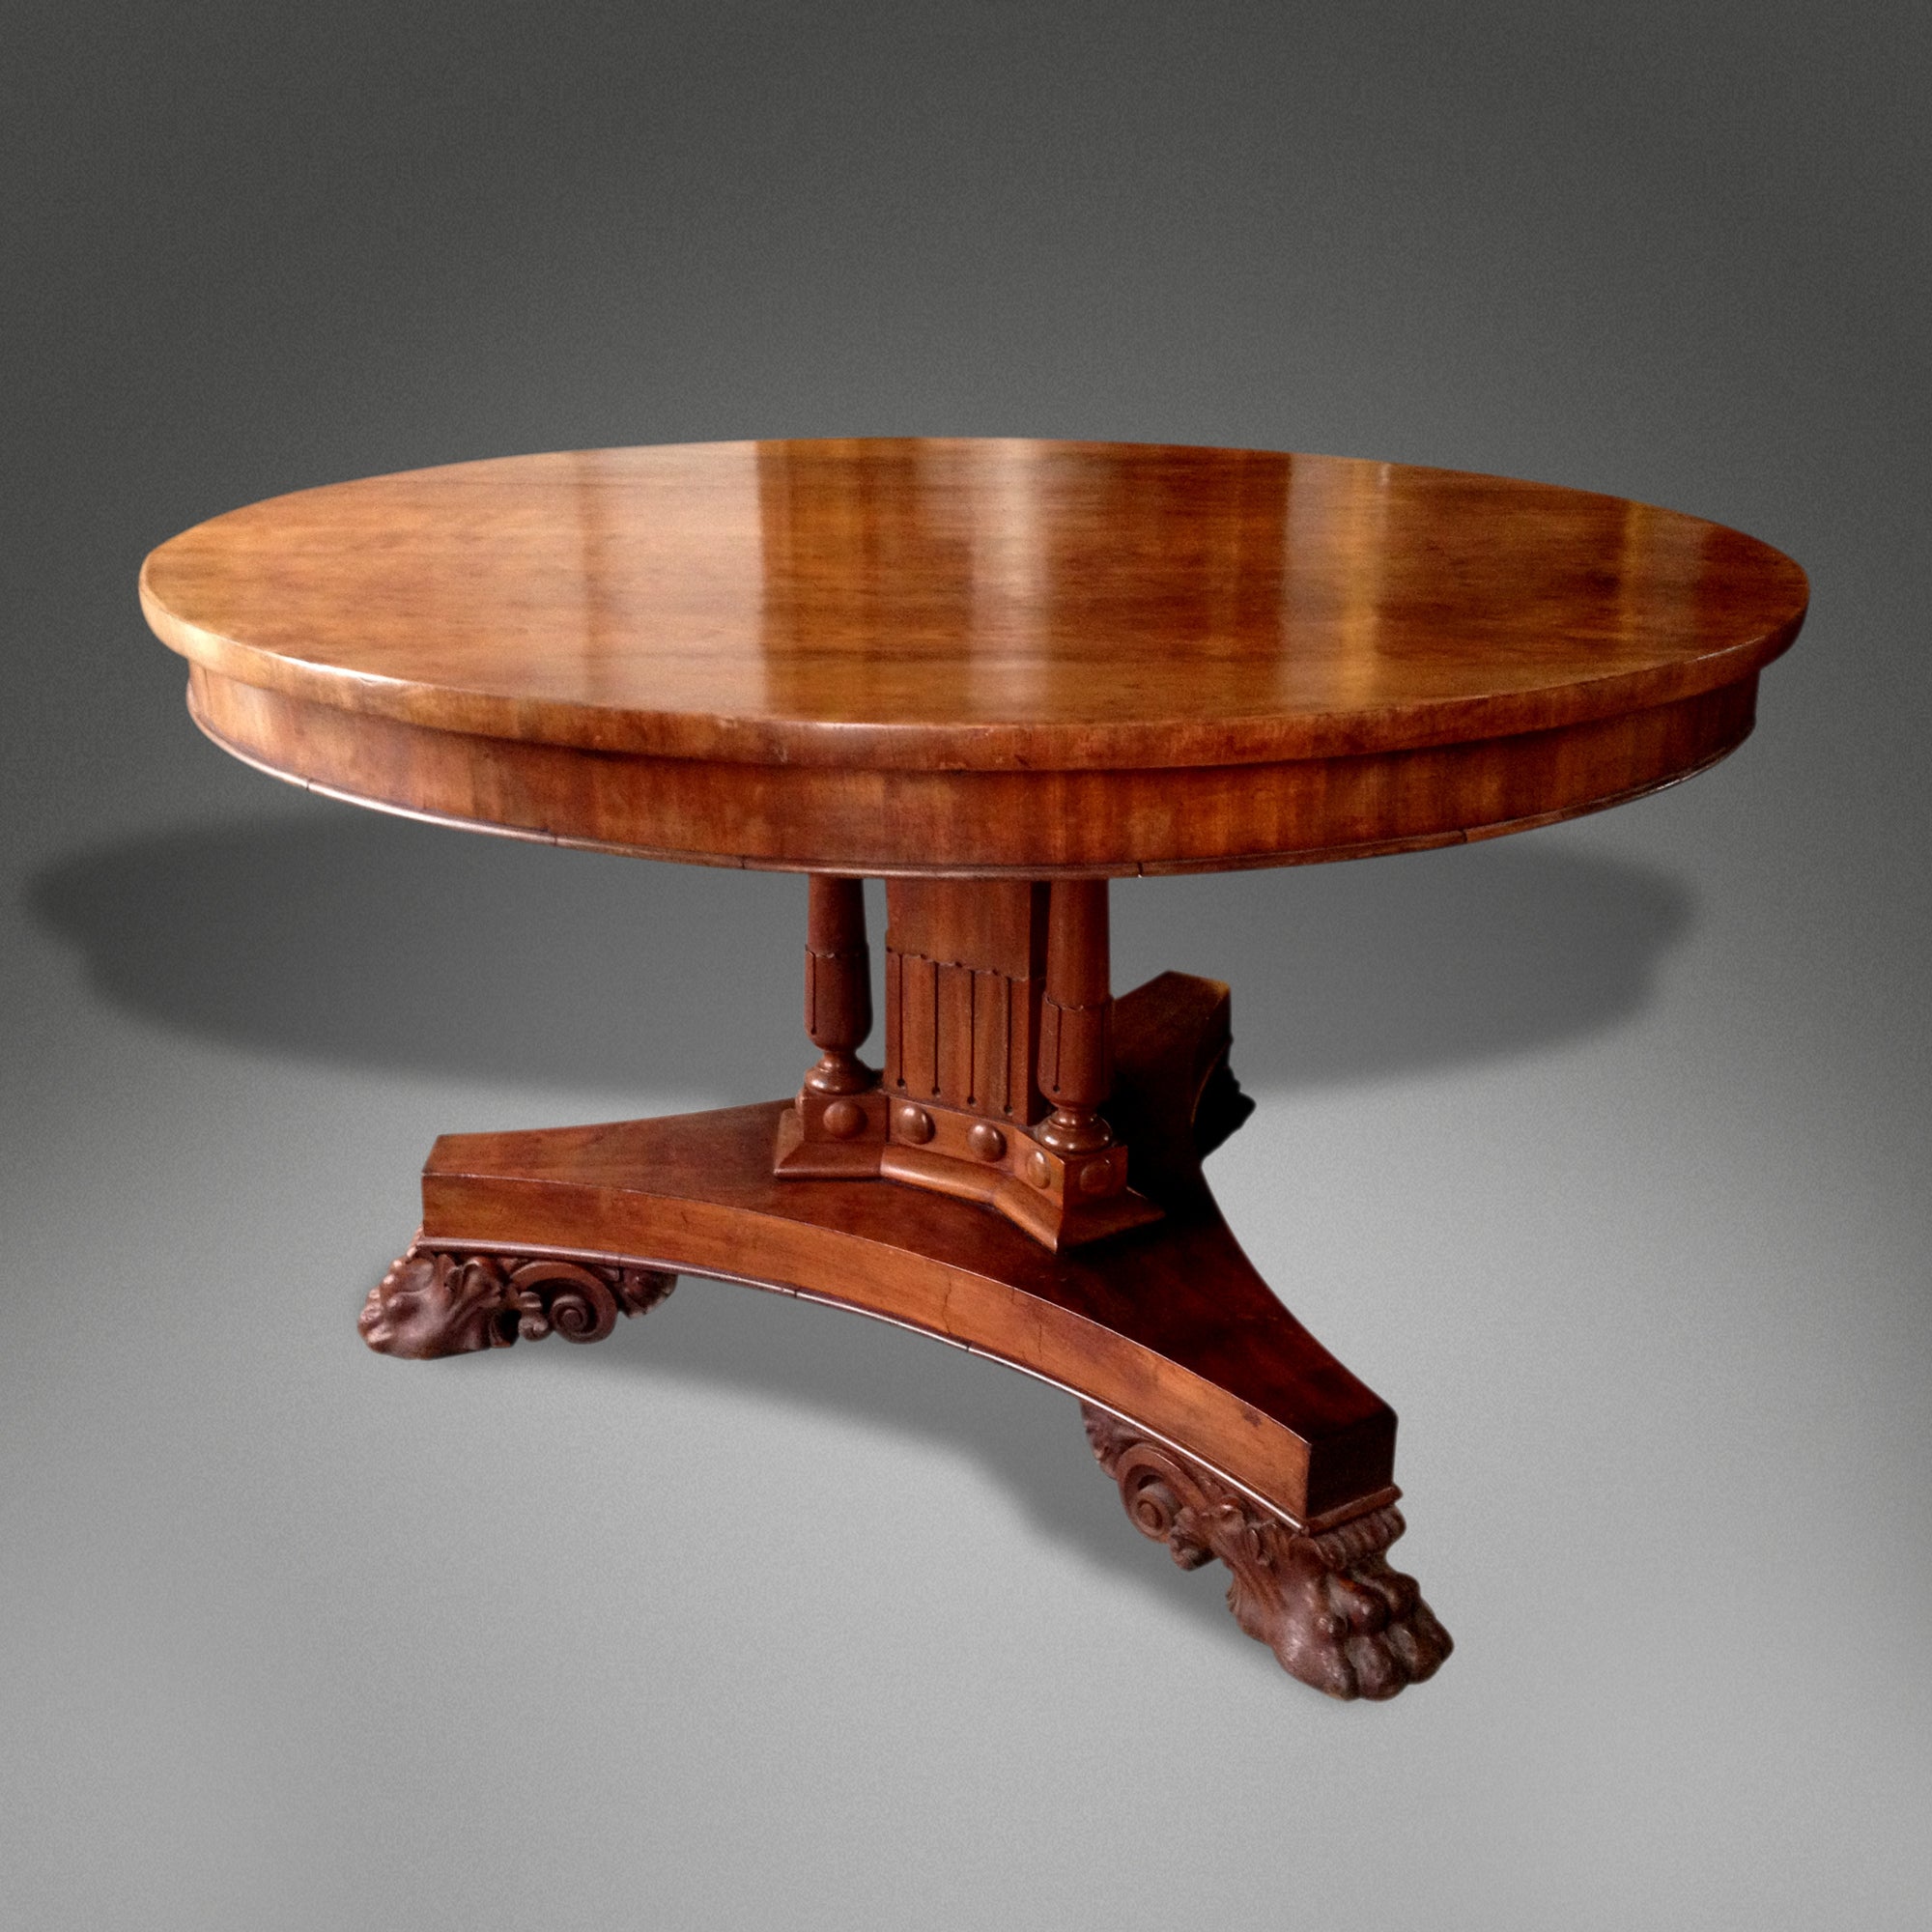 A Very Good Quality Regency Period Mahogany Centre Table For Sale